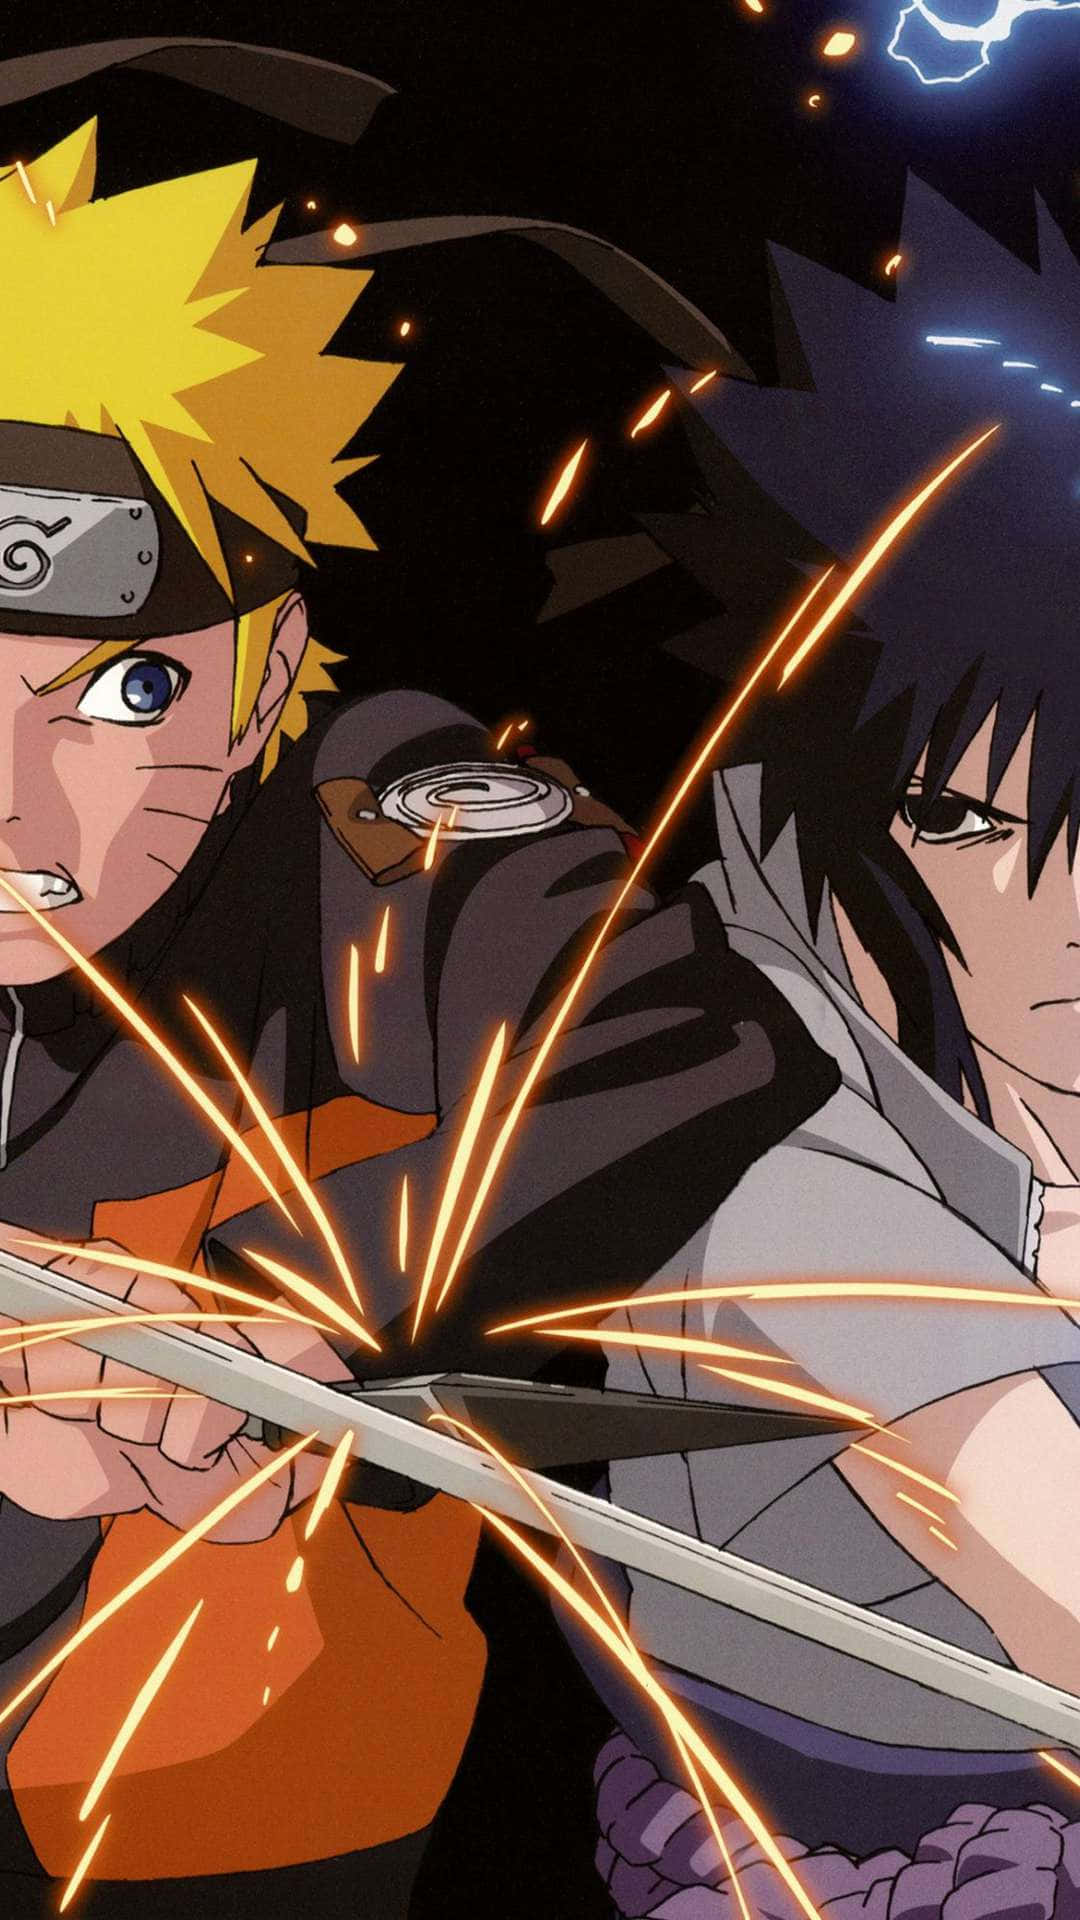 Two warriors ready to fight in a thrilling anime battle